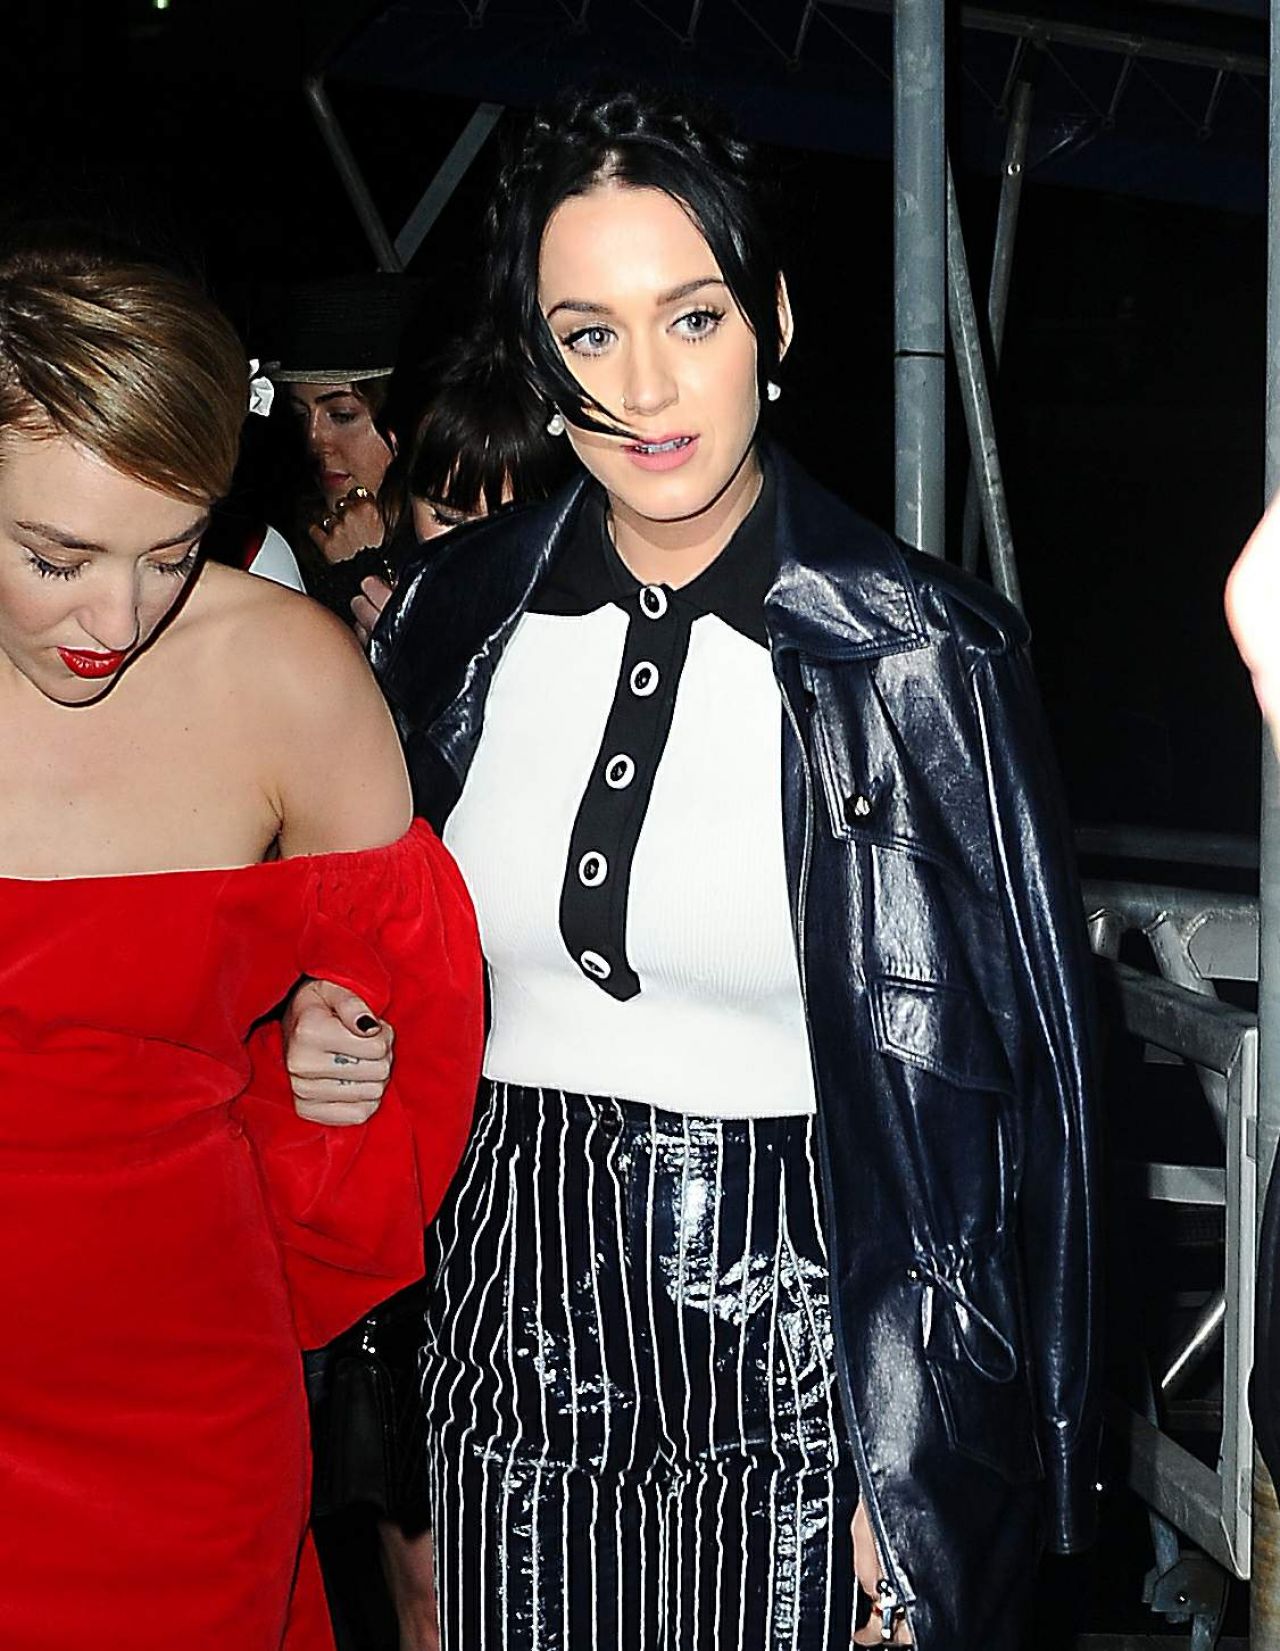 Katy Perry at Karl Lagerfeld's Chanel Boat Party in New York City ...